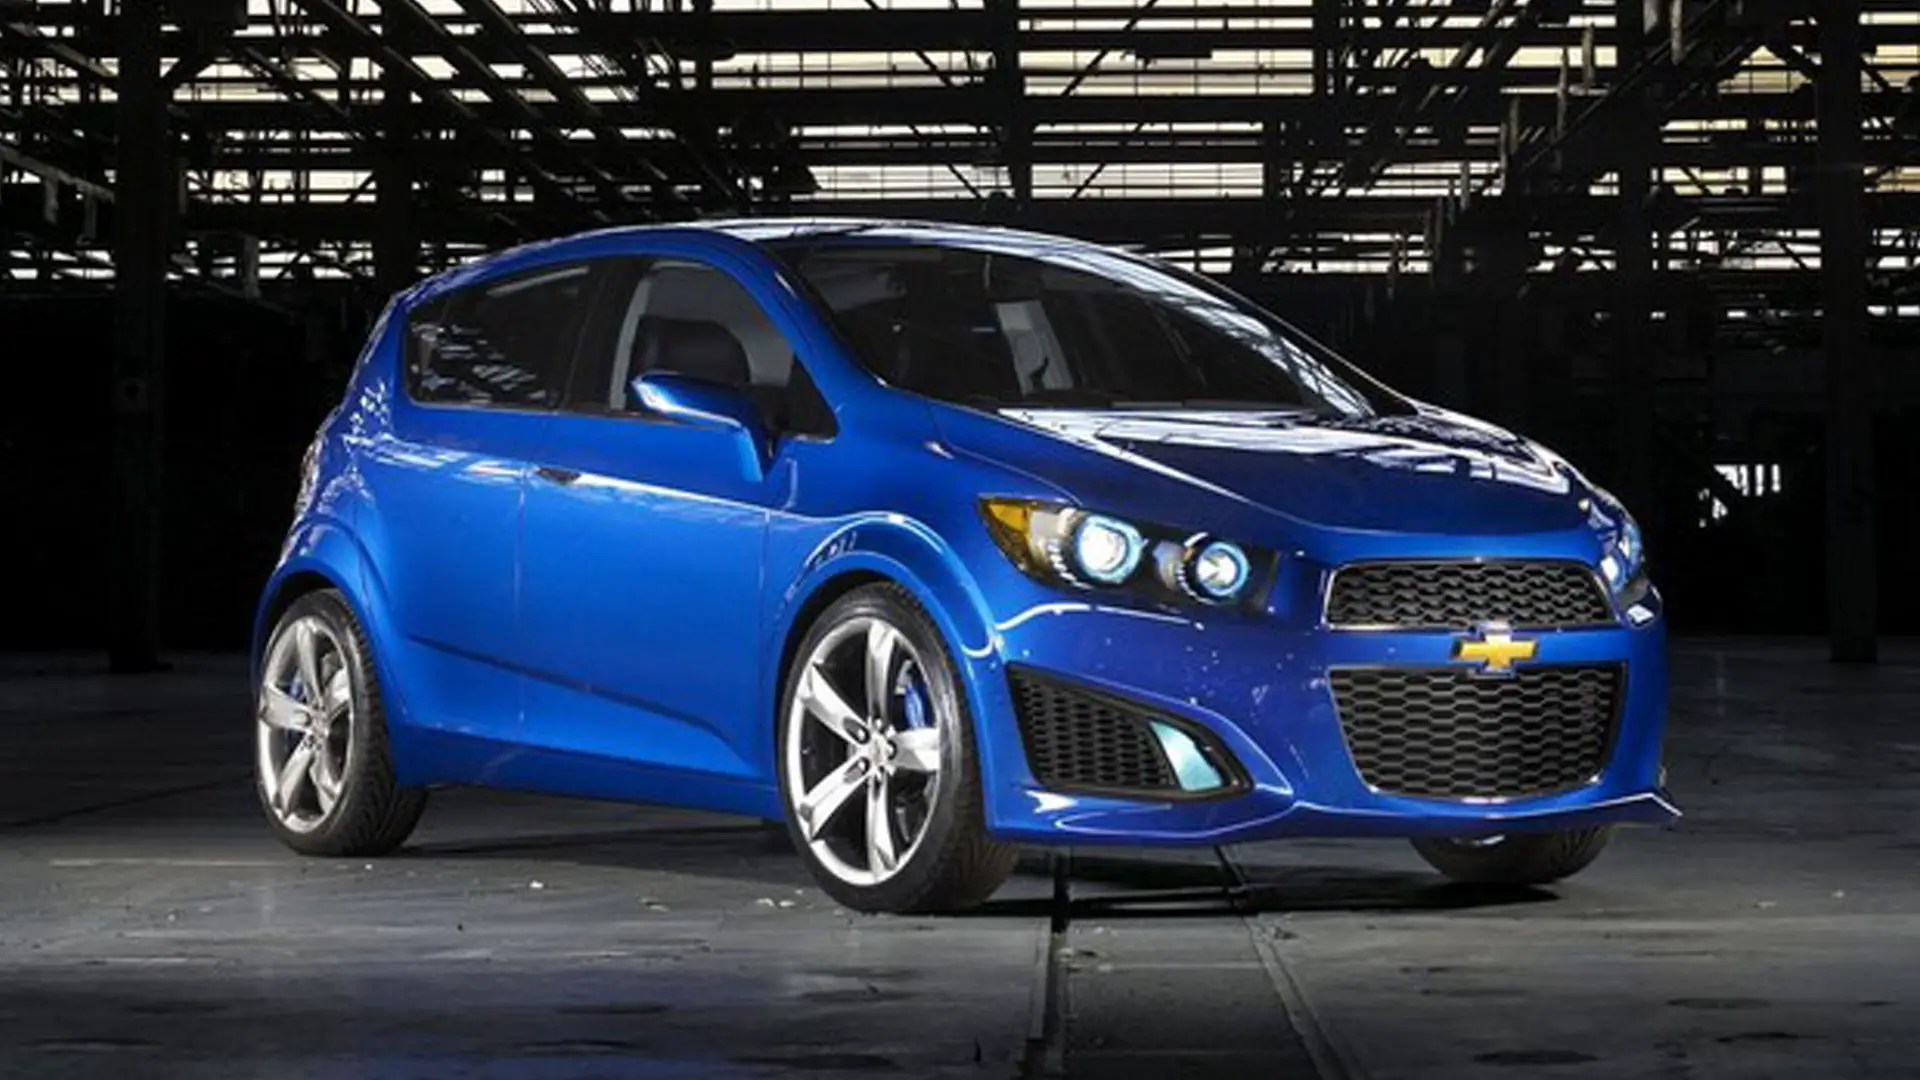 2013 Chevrolet Sonic Rs Heels On Wheels Review